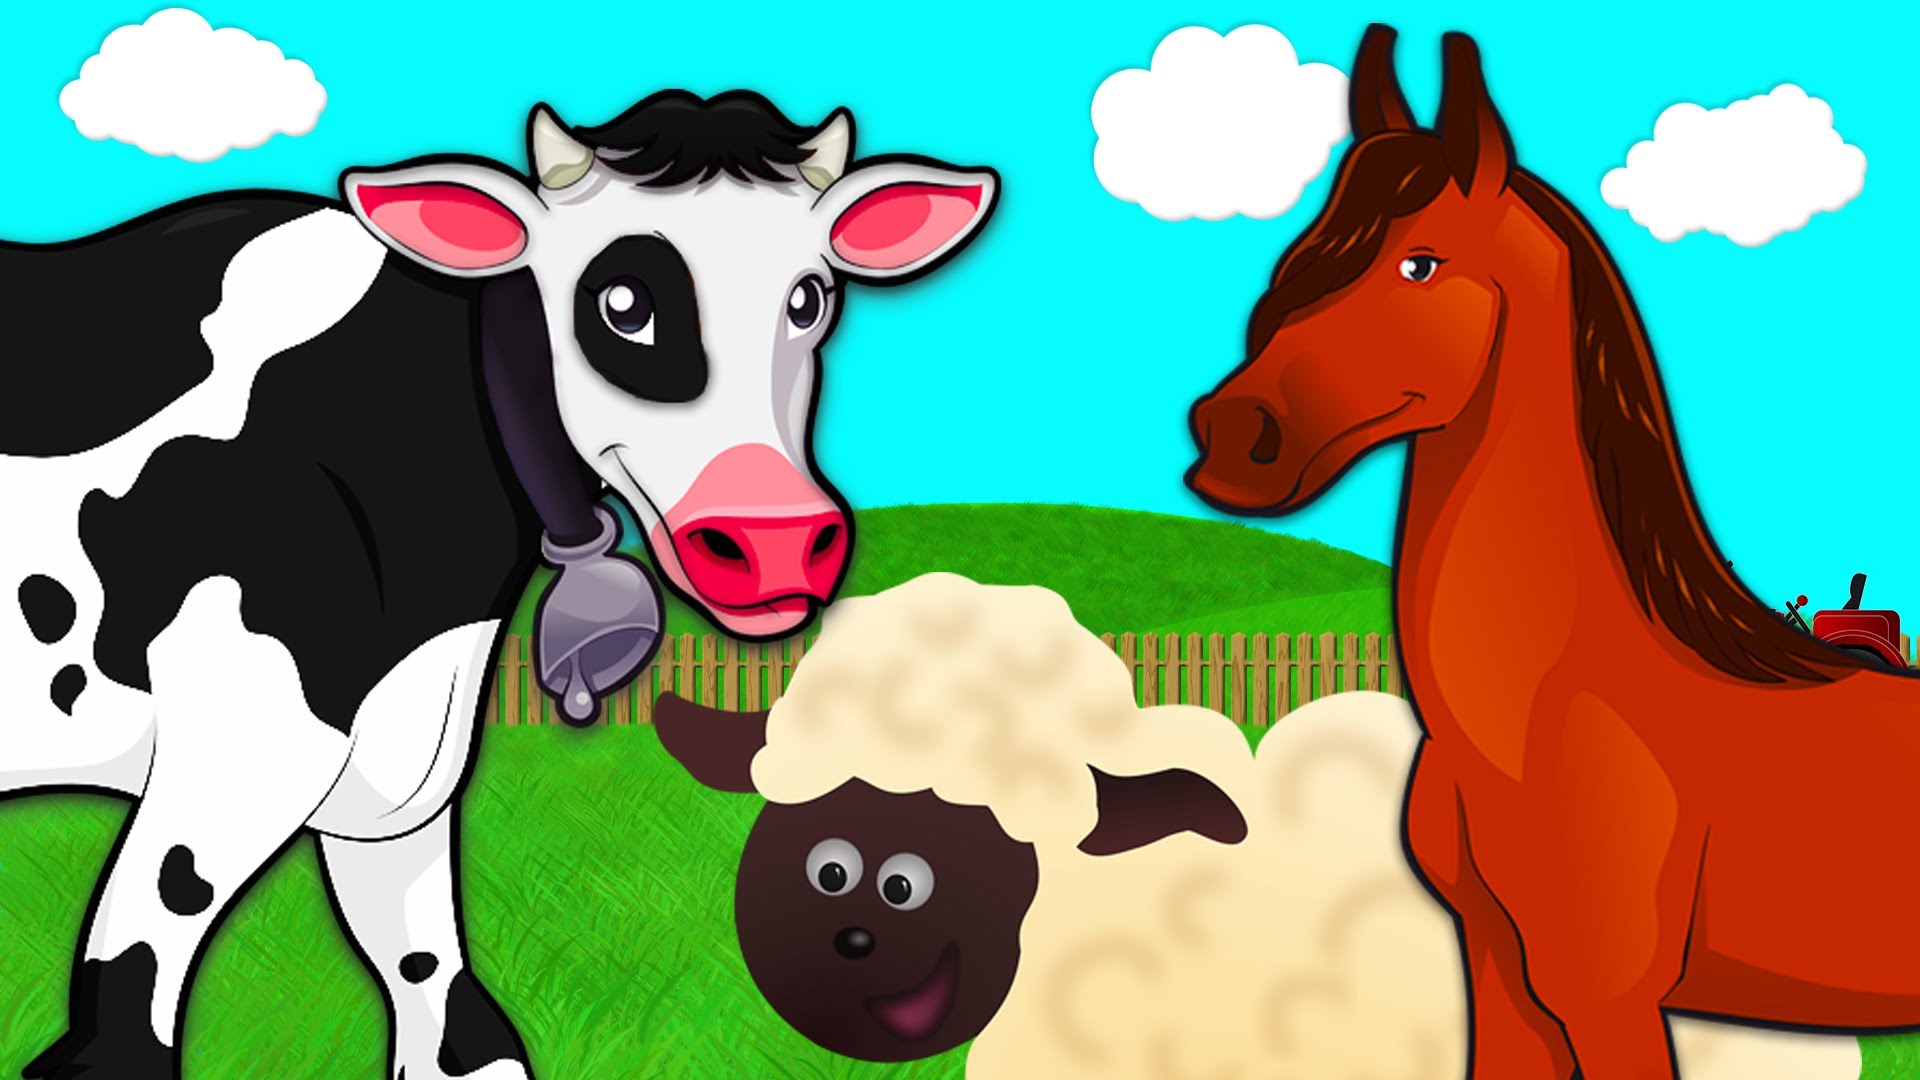 cattle clipart kid